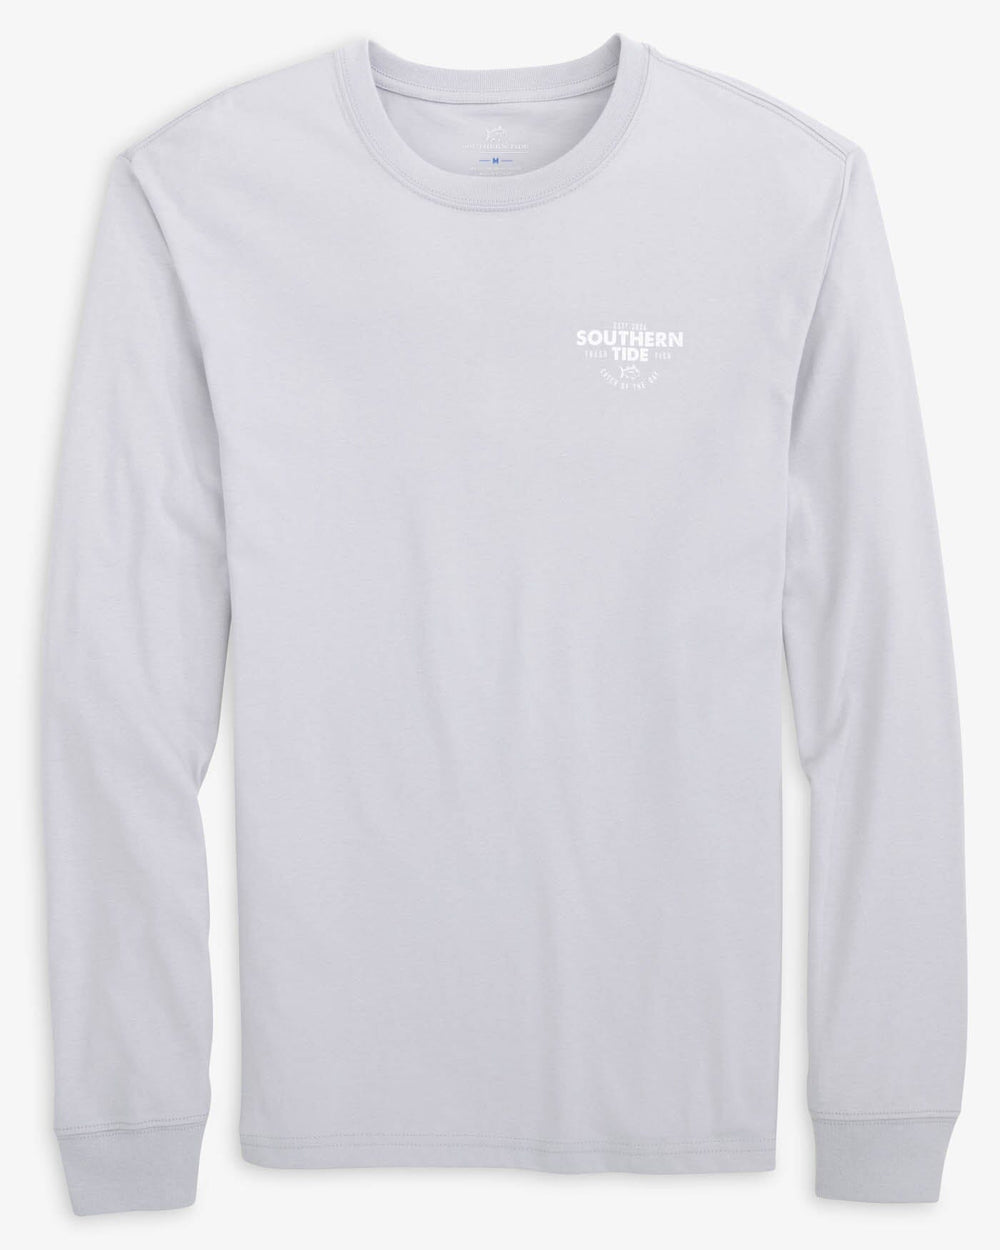 The front view of the Southern Tide Catch of The Day Long Sleeve T-Shirt by Southern Tide - Platinum Grey